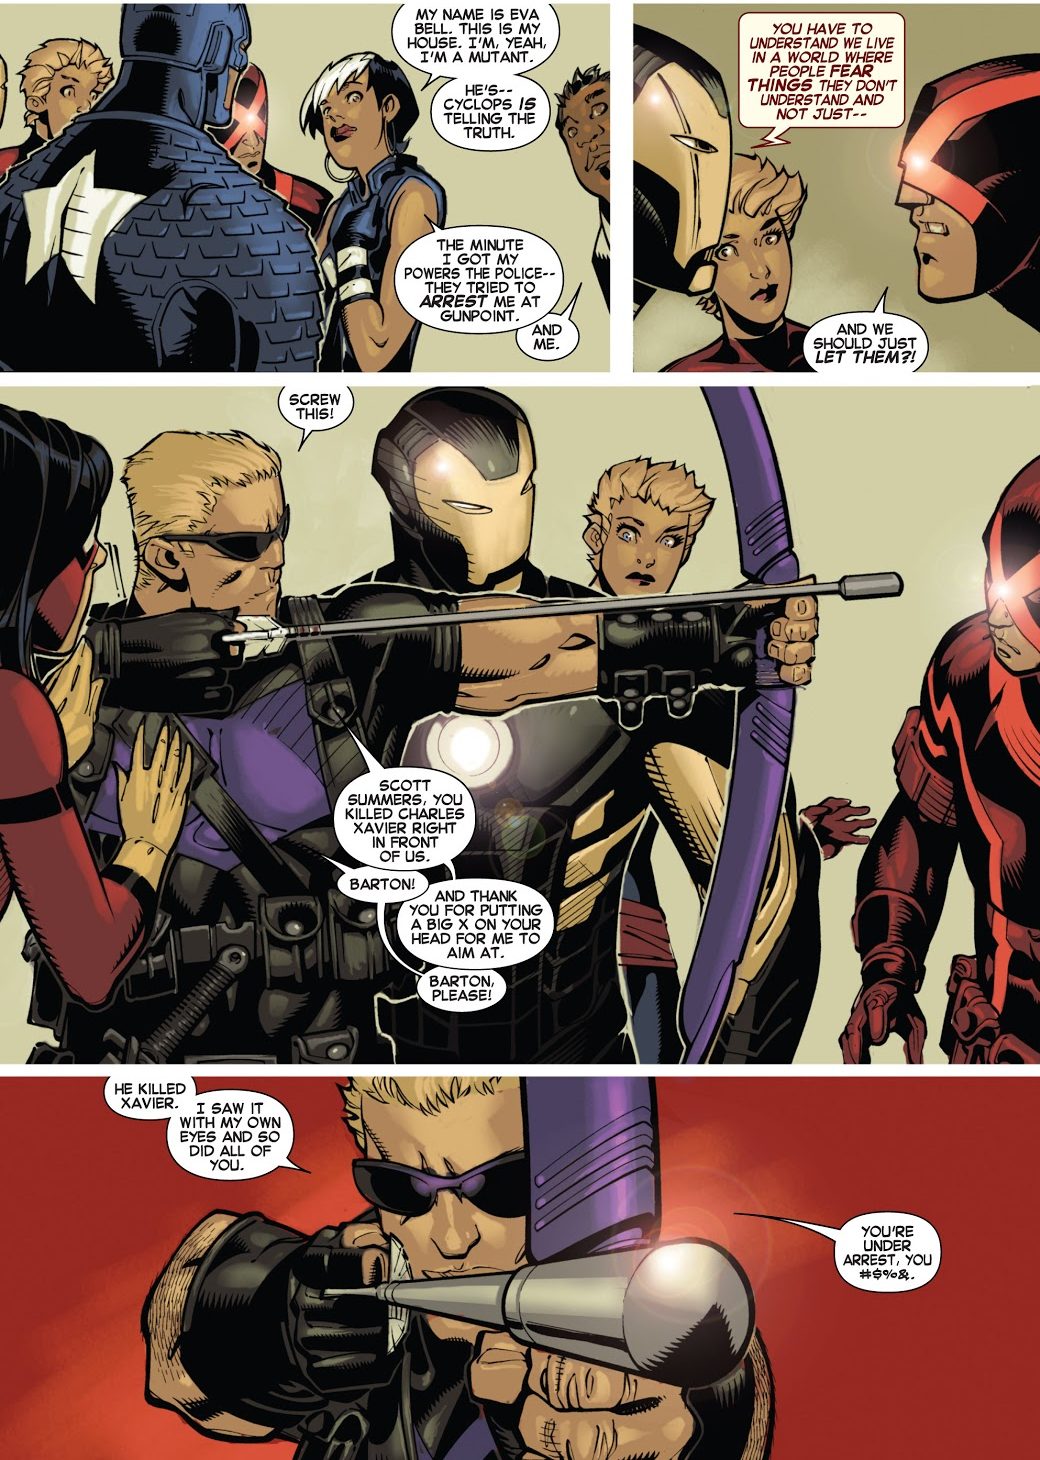 Cyclops Tells The Avengers To Go To Hell